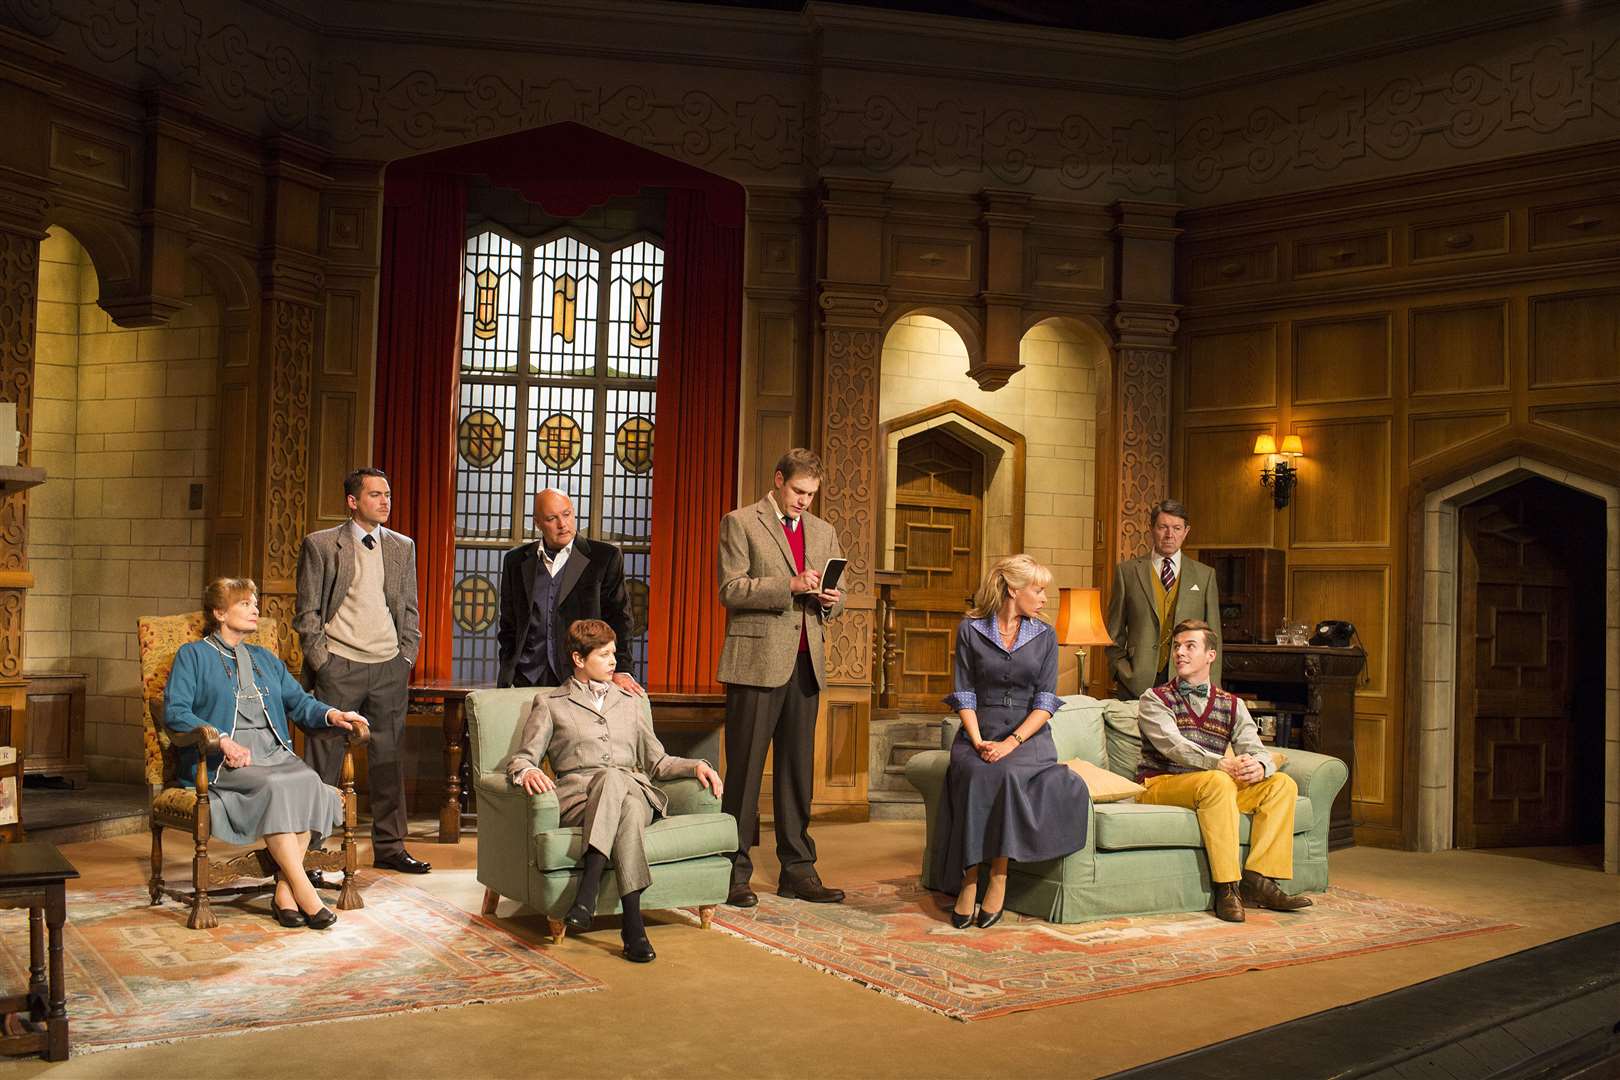 Agatha Christie's legendary The Mousetrap comes to Kent for a 62nd anniversary tour.